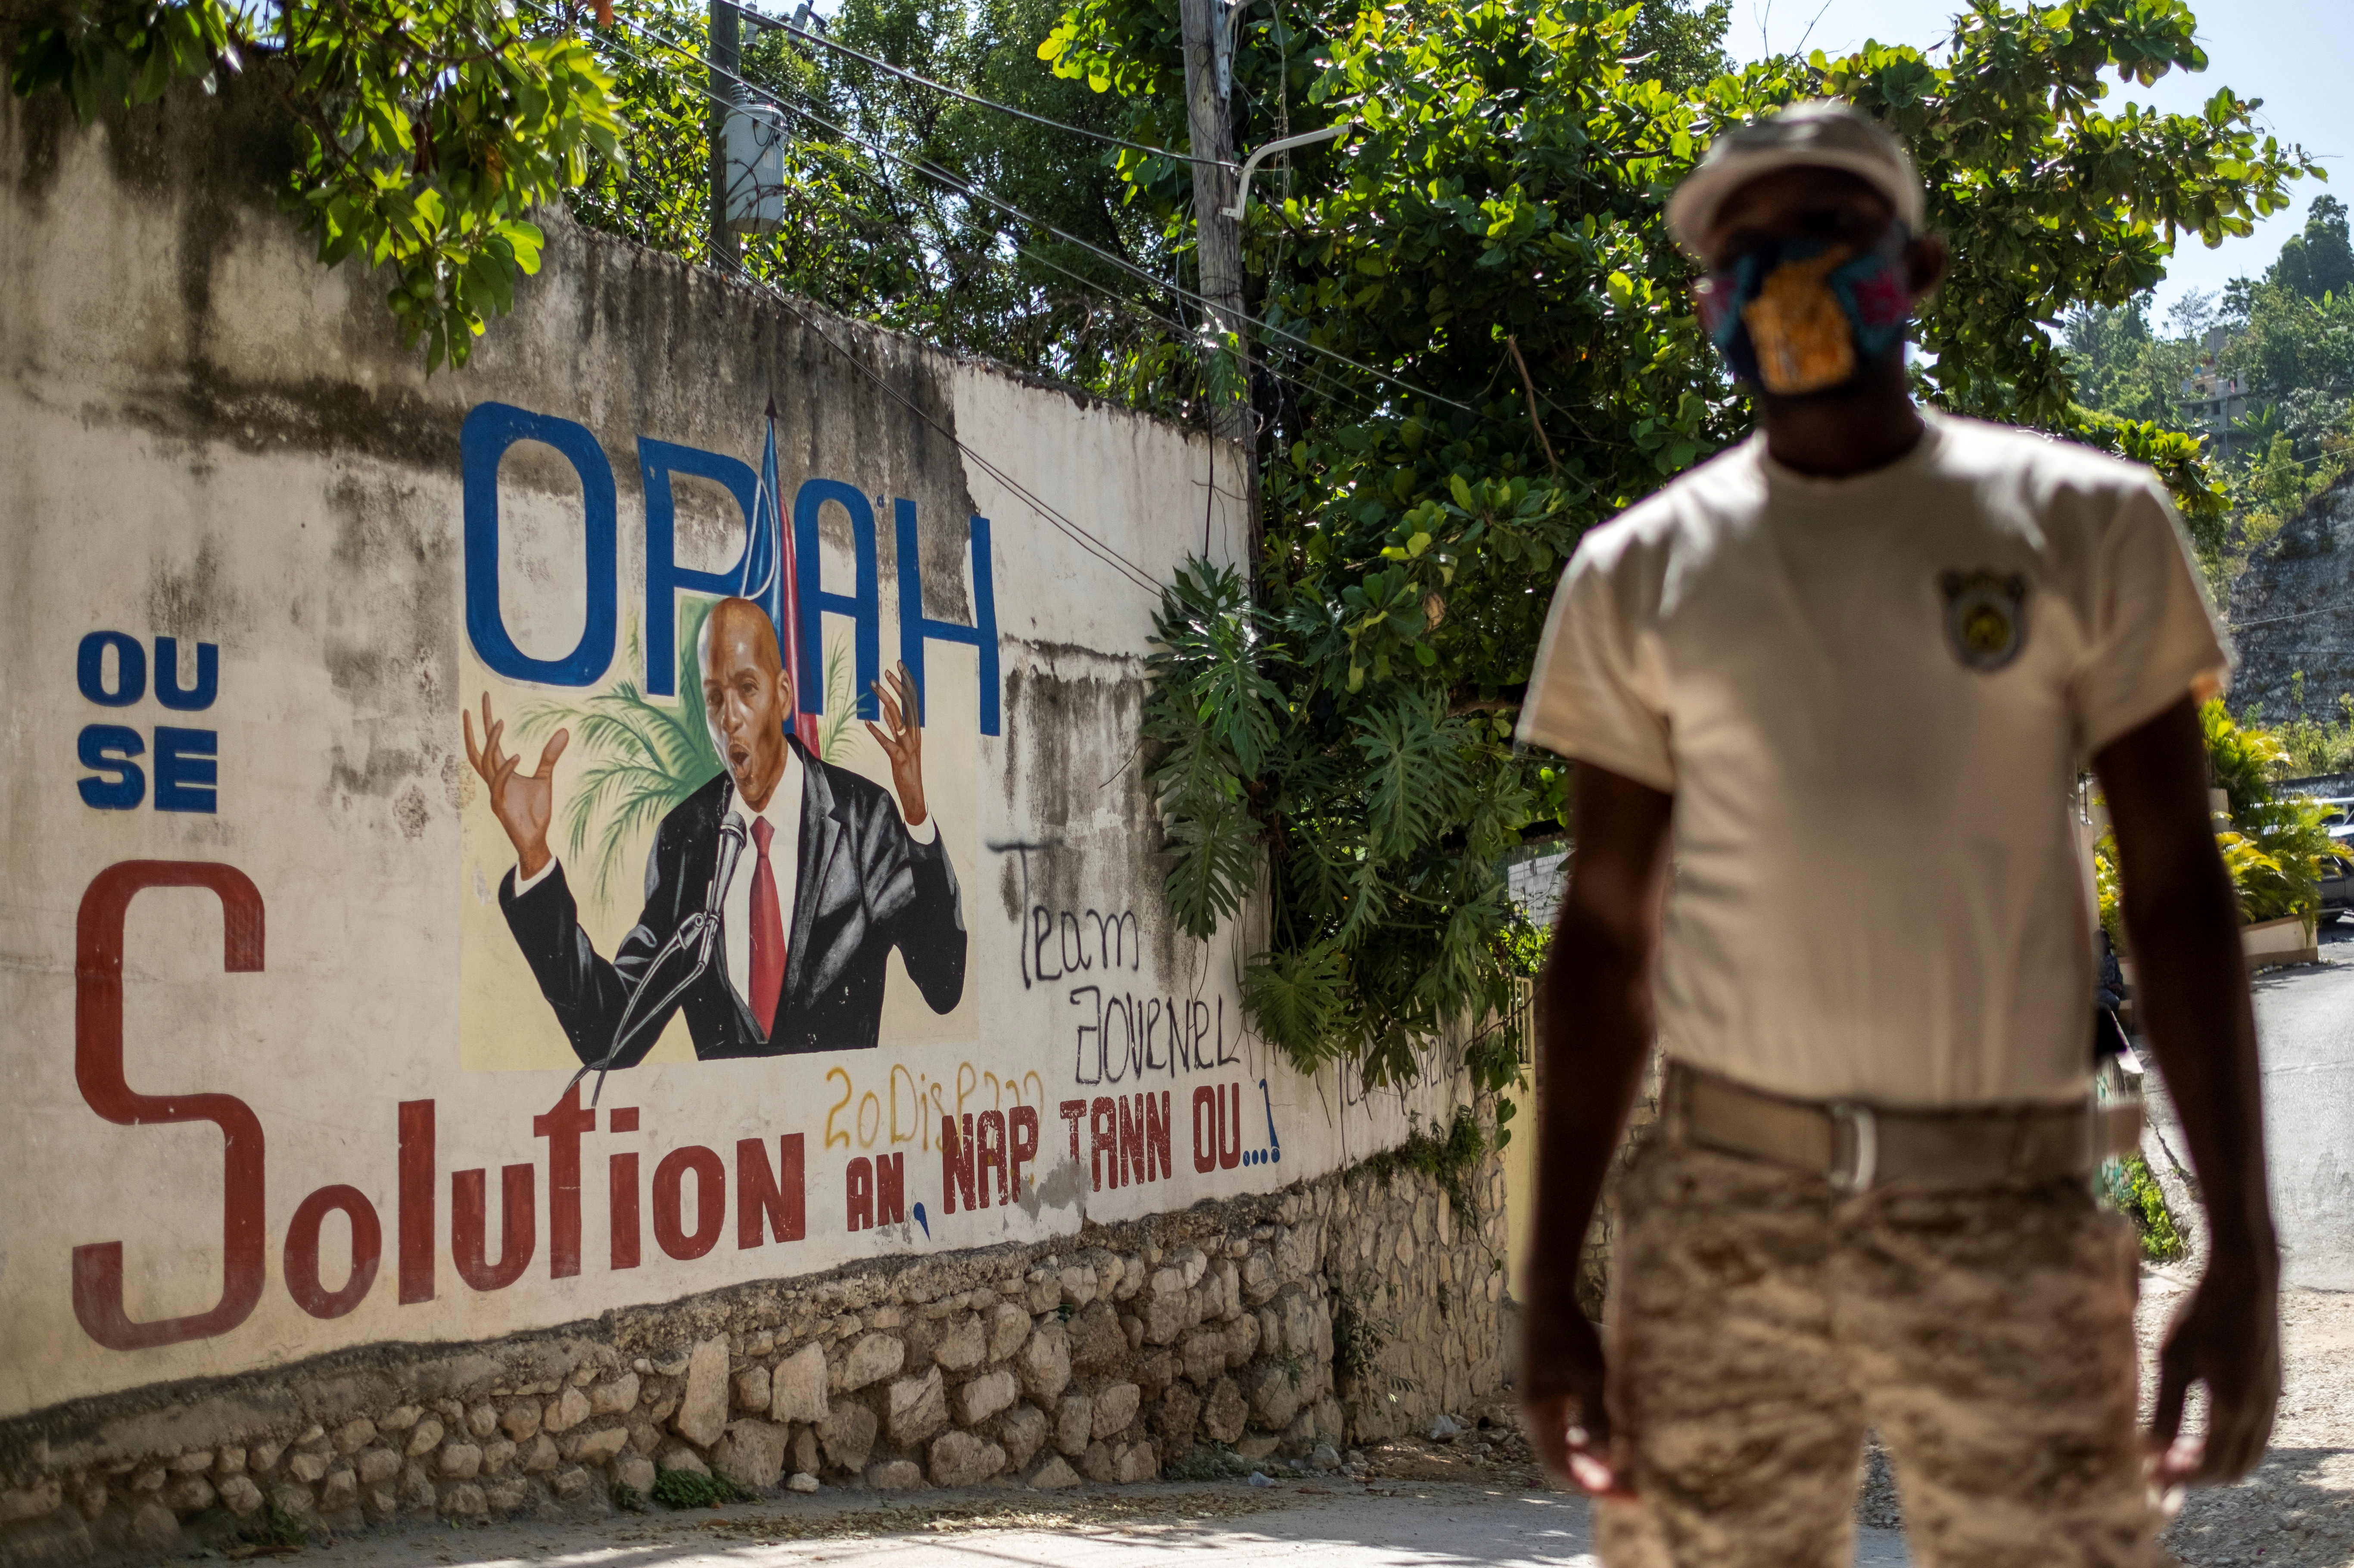 A Haitian police officer stands near a mural featuring President Jovenel Moise in Port-au-Prince